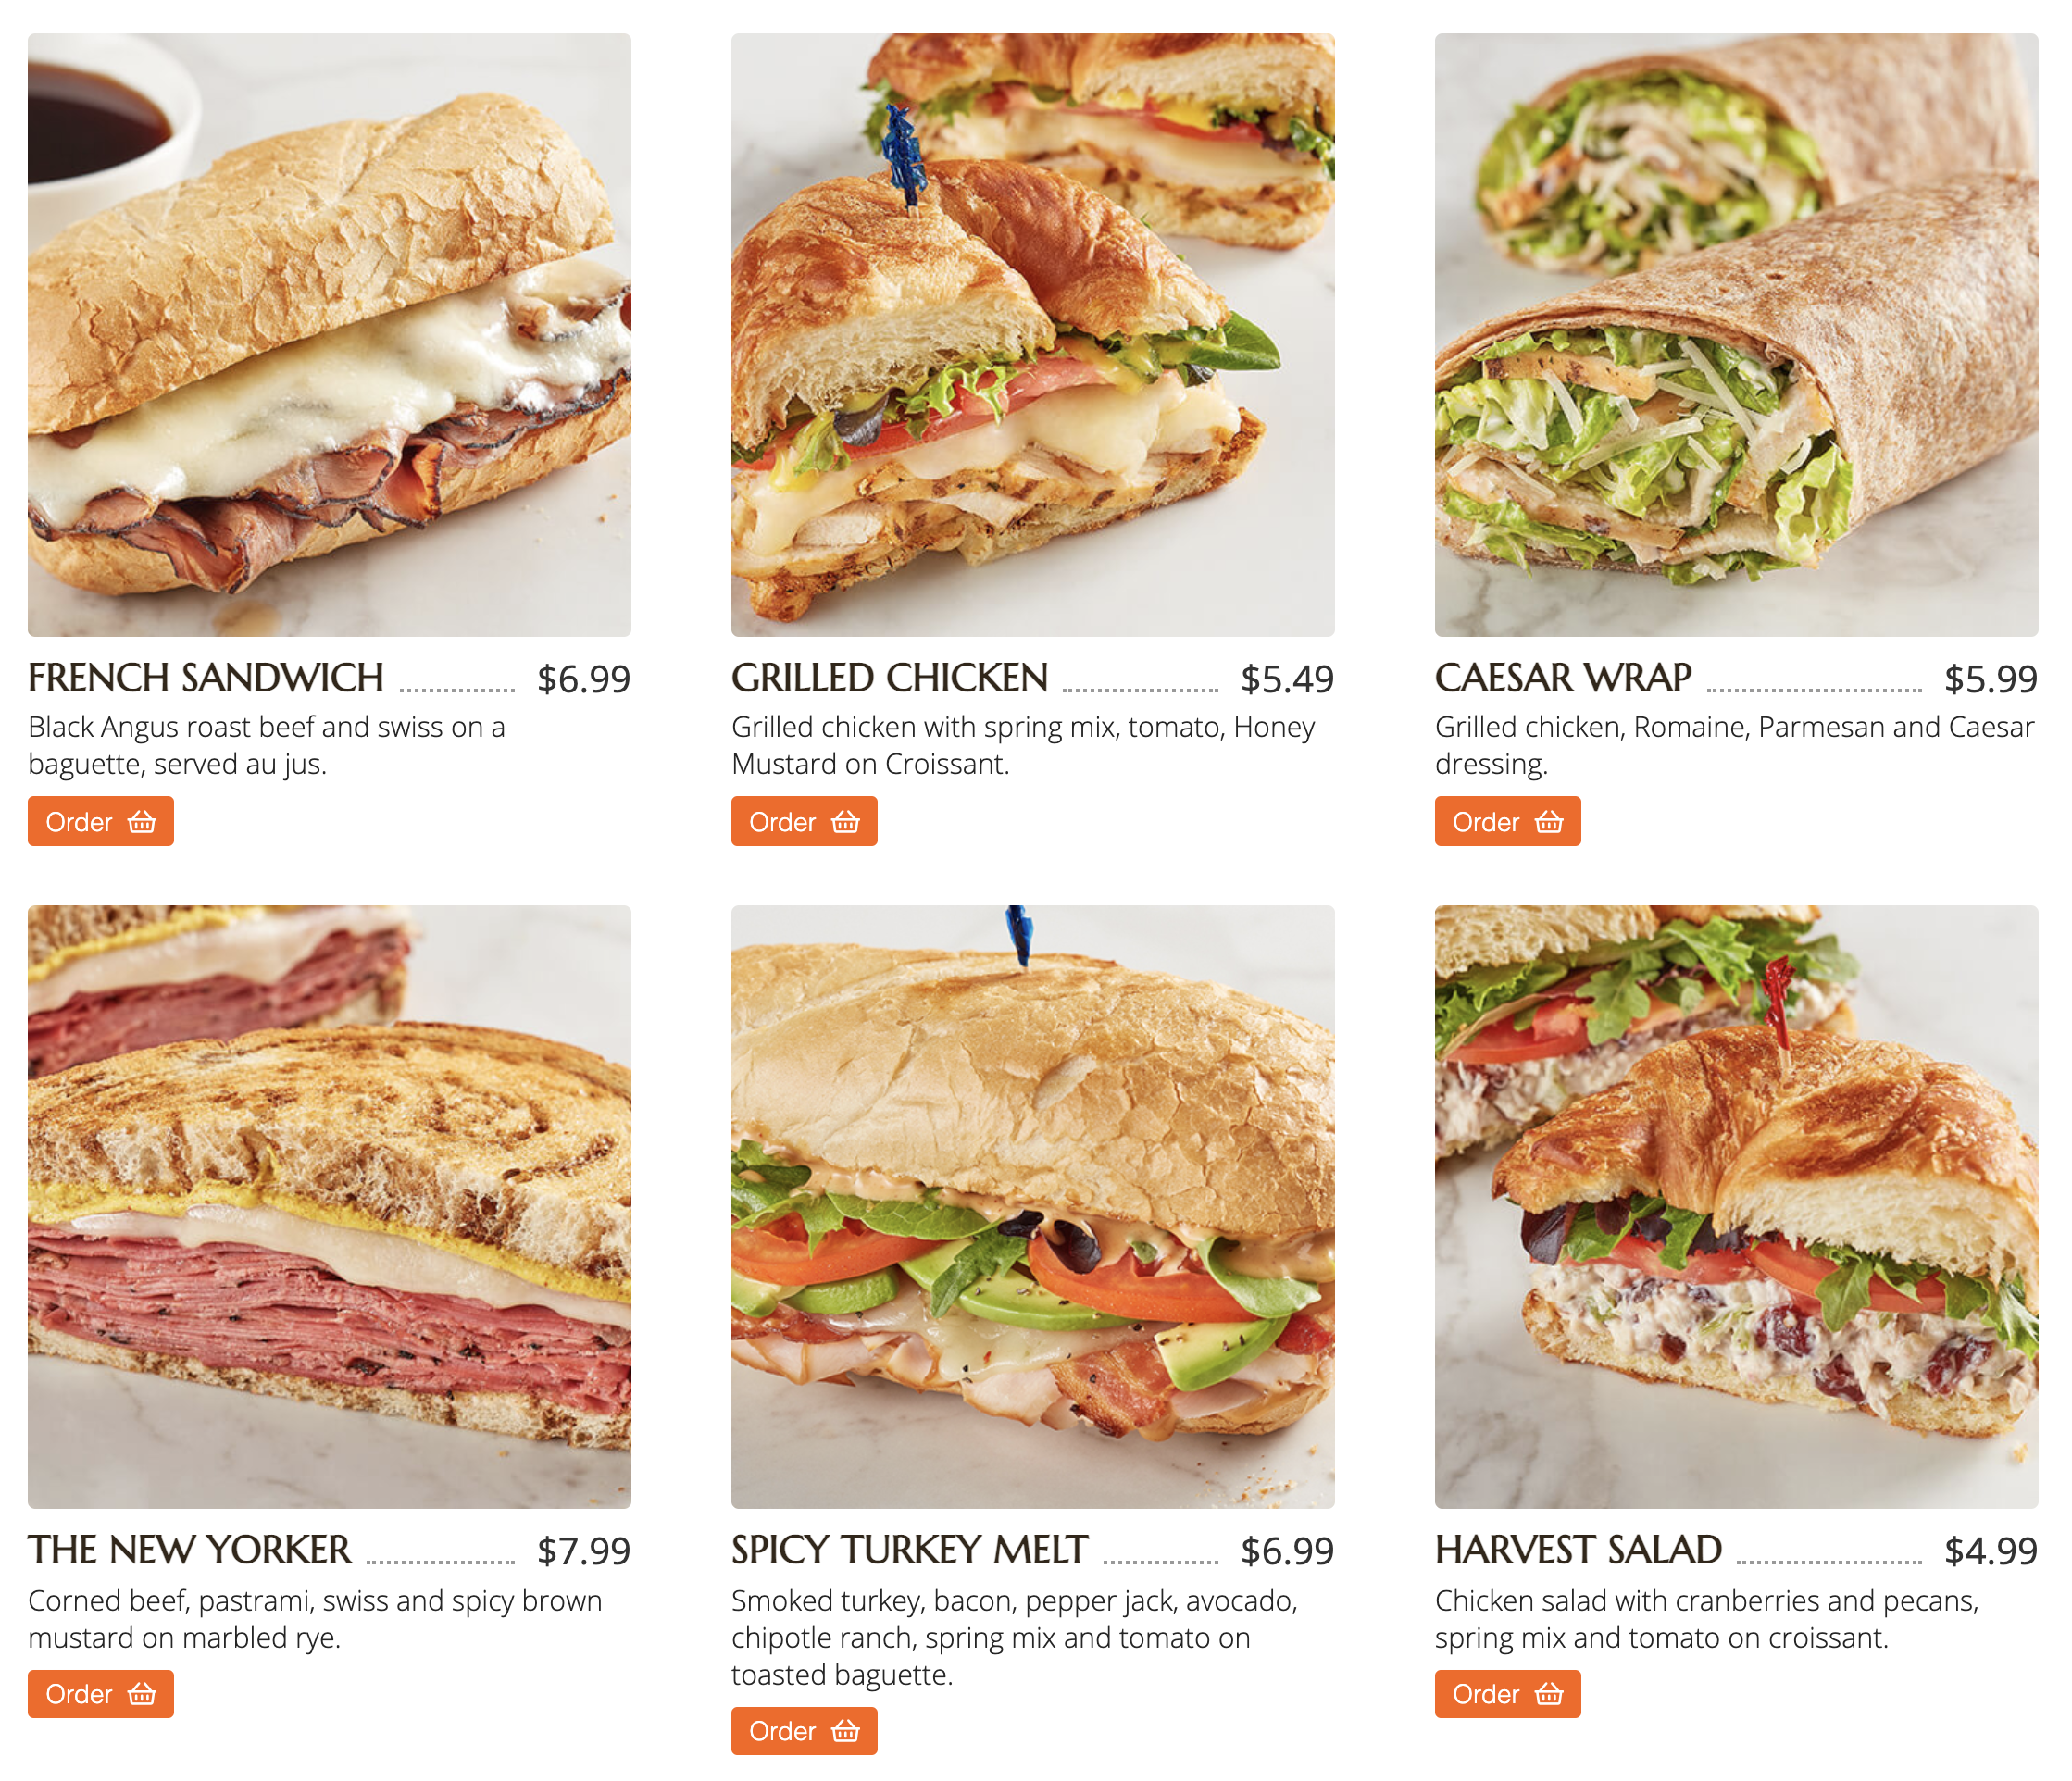 Order online layout with smart search on top and meal categories on the left.